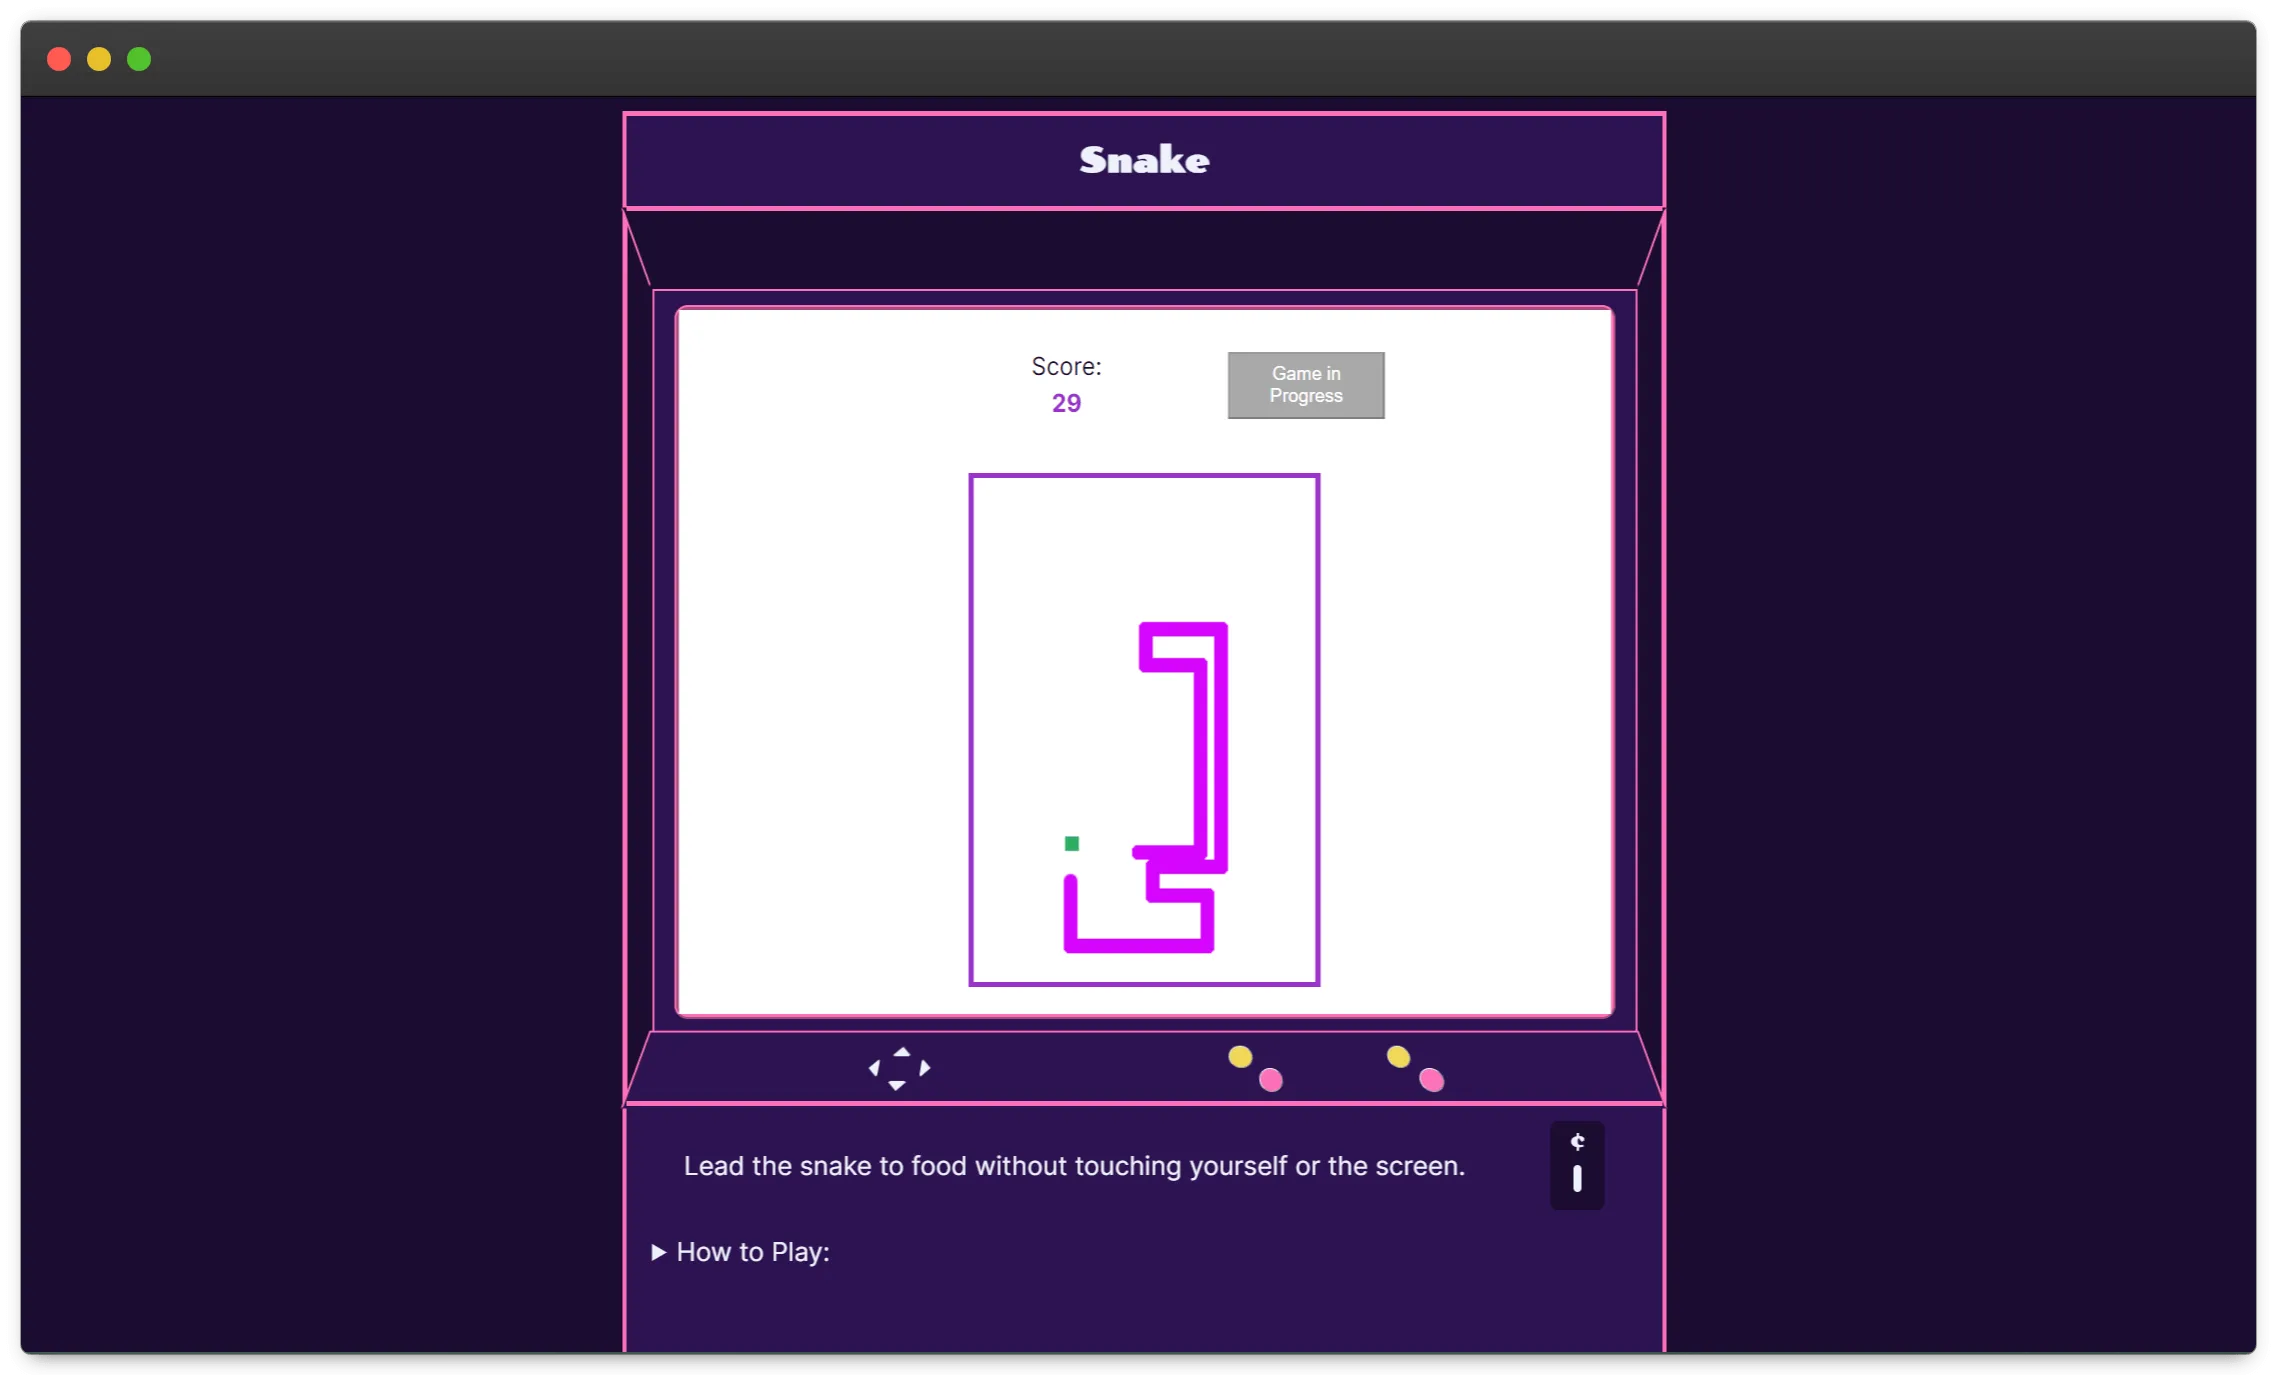 A purple background with an arcade machine in the center, outlined in neon pink. The machine heading says the game is called Snake. On the white screen, it shows the user has a score of 0 and a button saying a game is in progress. Below this is a purple outlined rectangle with a green square for the snake food and a light blue dot as the snake itself.